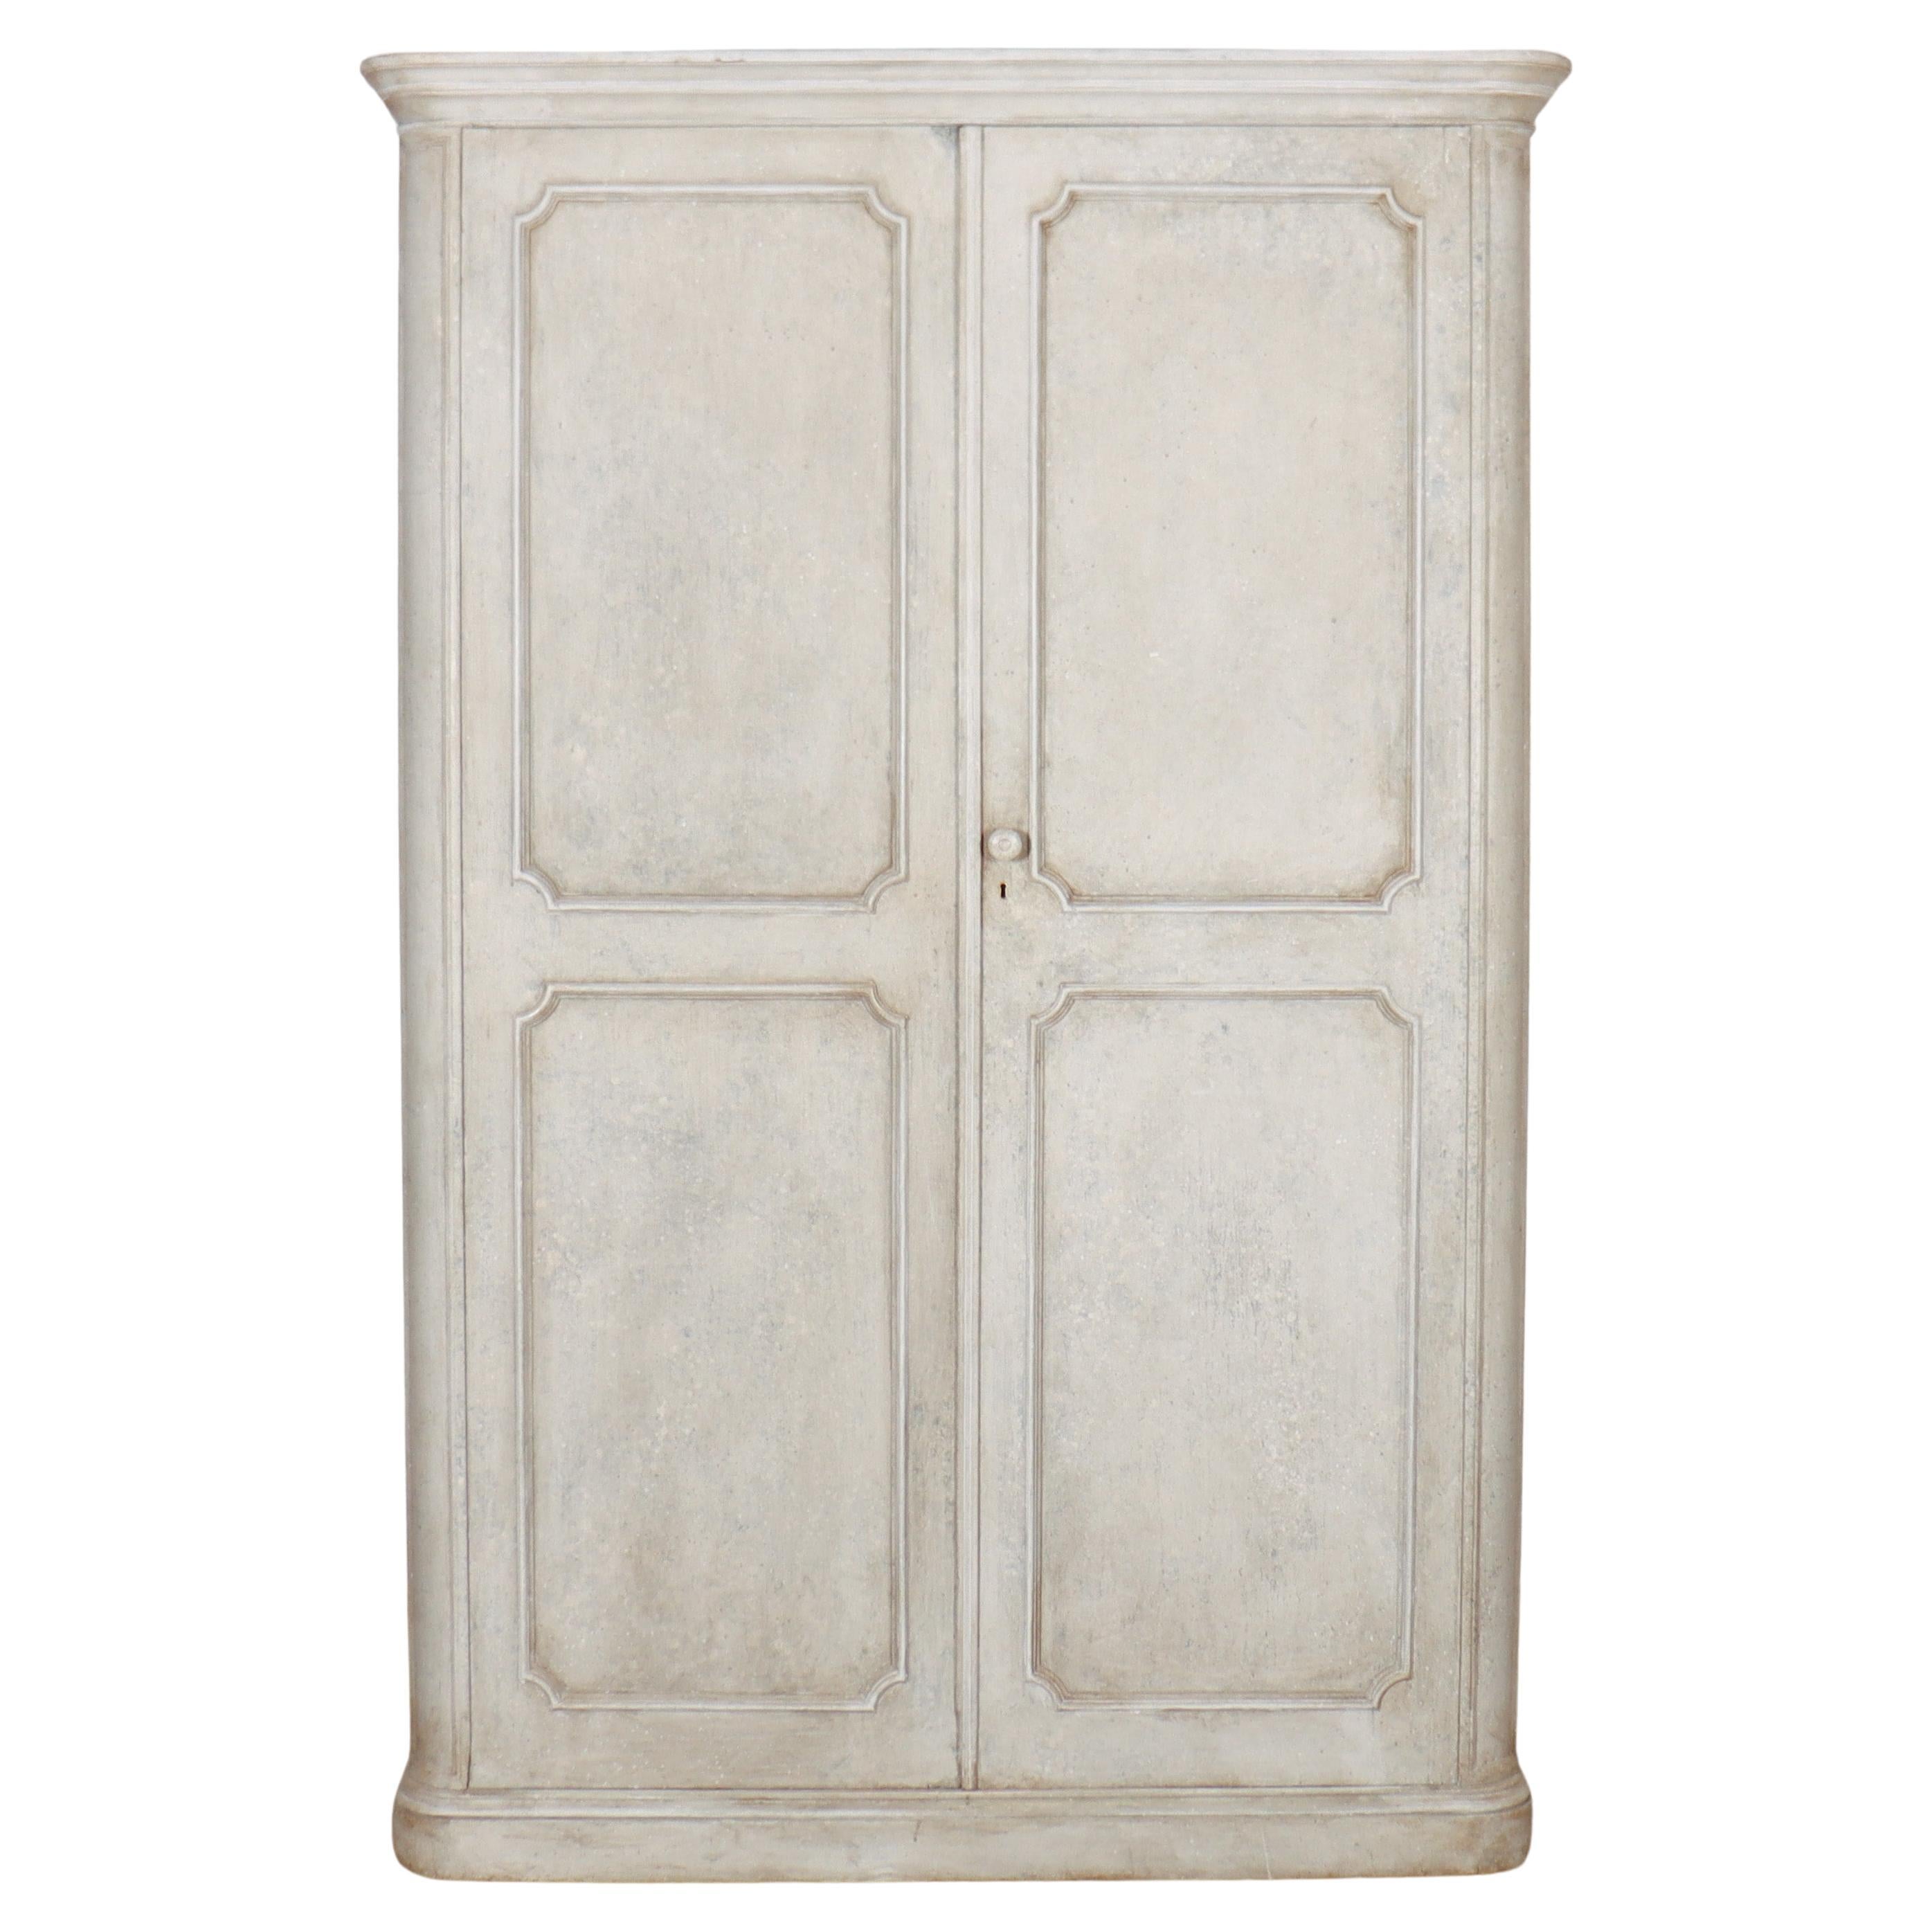 English Painted Linen Cupboard